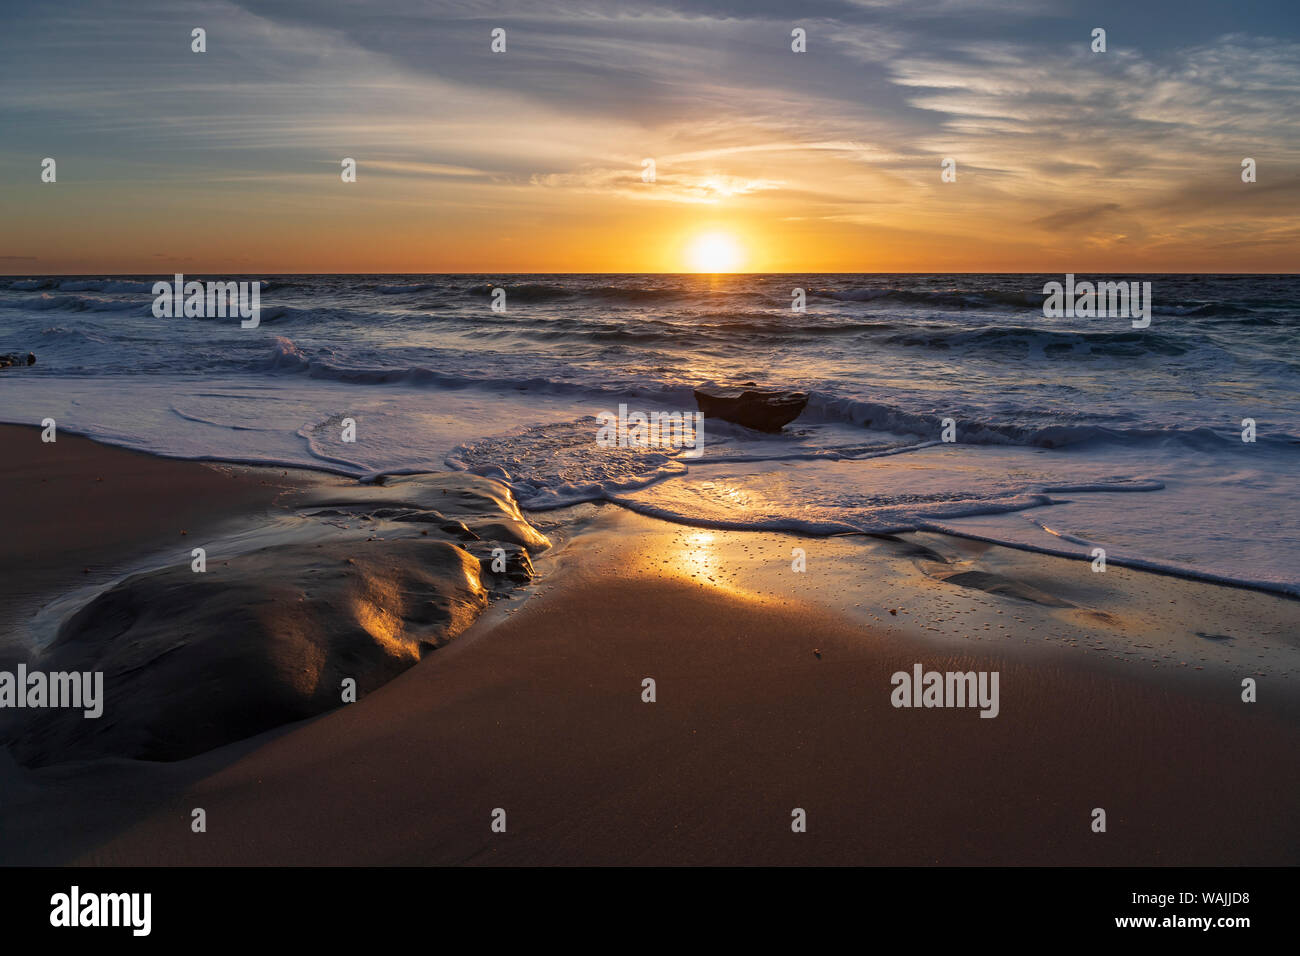 Sunset reflecting off the water on the sand of a beach Stock Photo